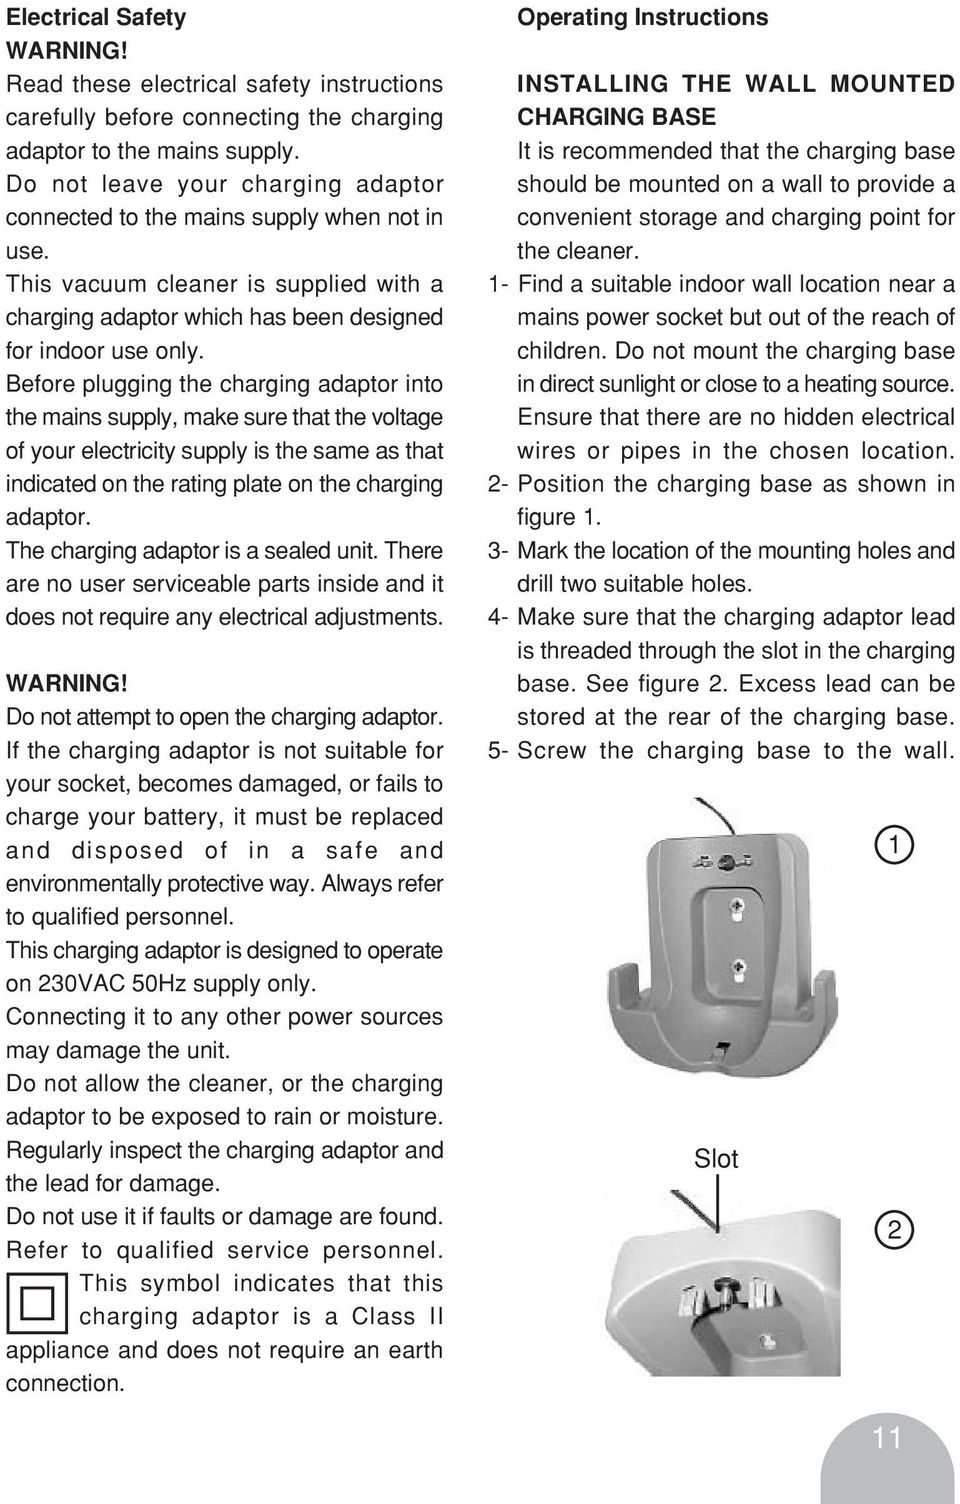 Before plugging the charging adaptor into the mains supply, make sure that the voltage of your electricity supply is the same as that indicated on the rating plate on the charging adaptor.